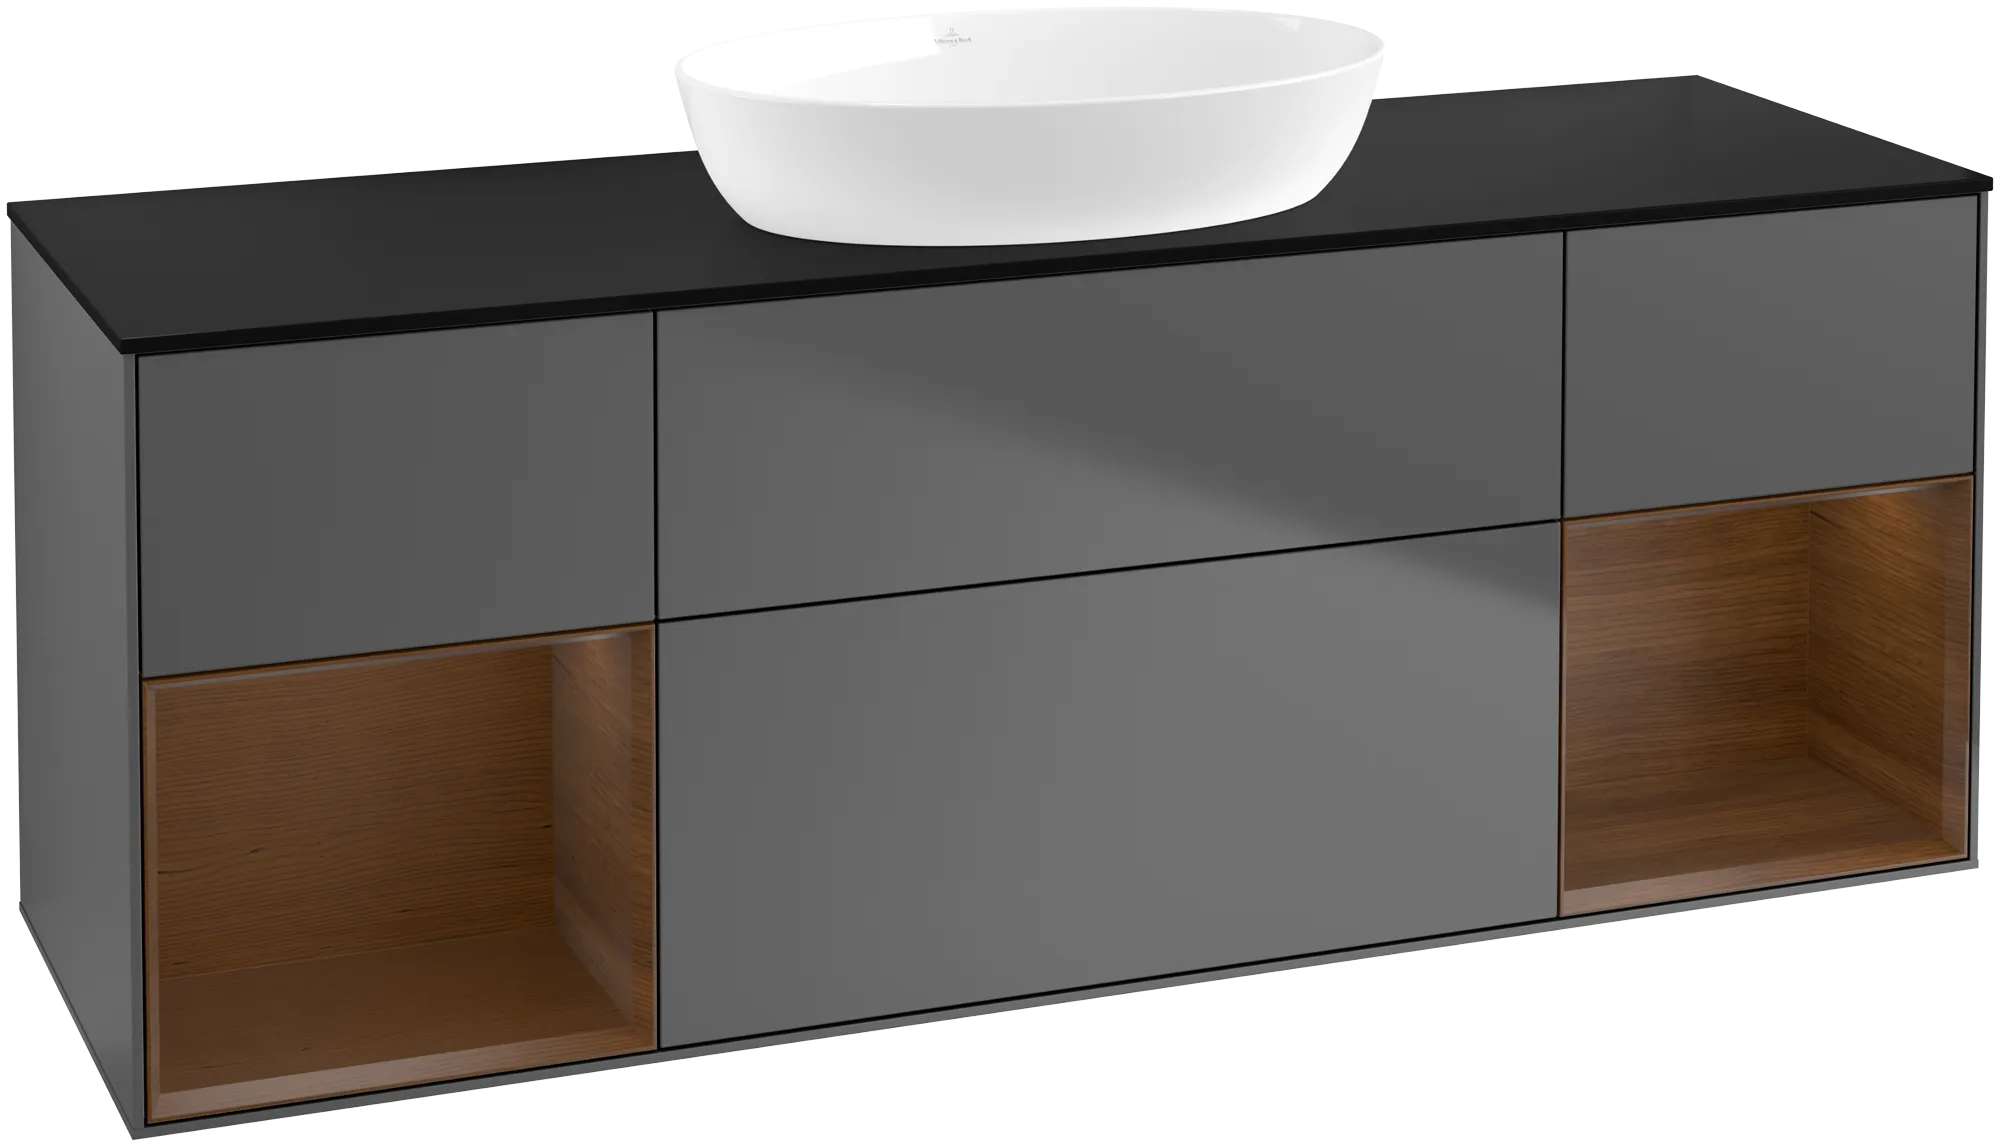 Picture of VILLEROY BOCH Finion Vanity unit, with lighting, 4 pull-out compartments, 1600 x 603 x 501 mm, Anthracite Matt Lacquer / Walnut Veneer / Glass Black Matt #GD02GNGK